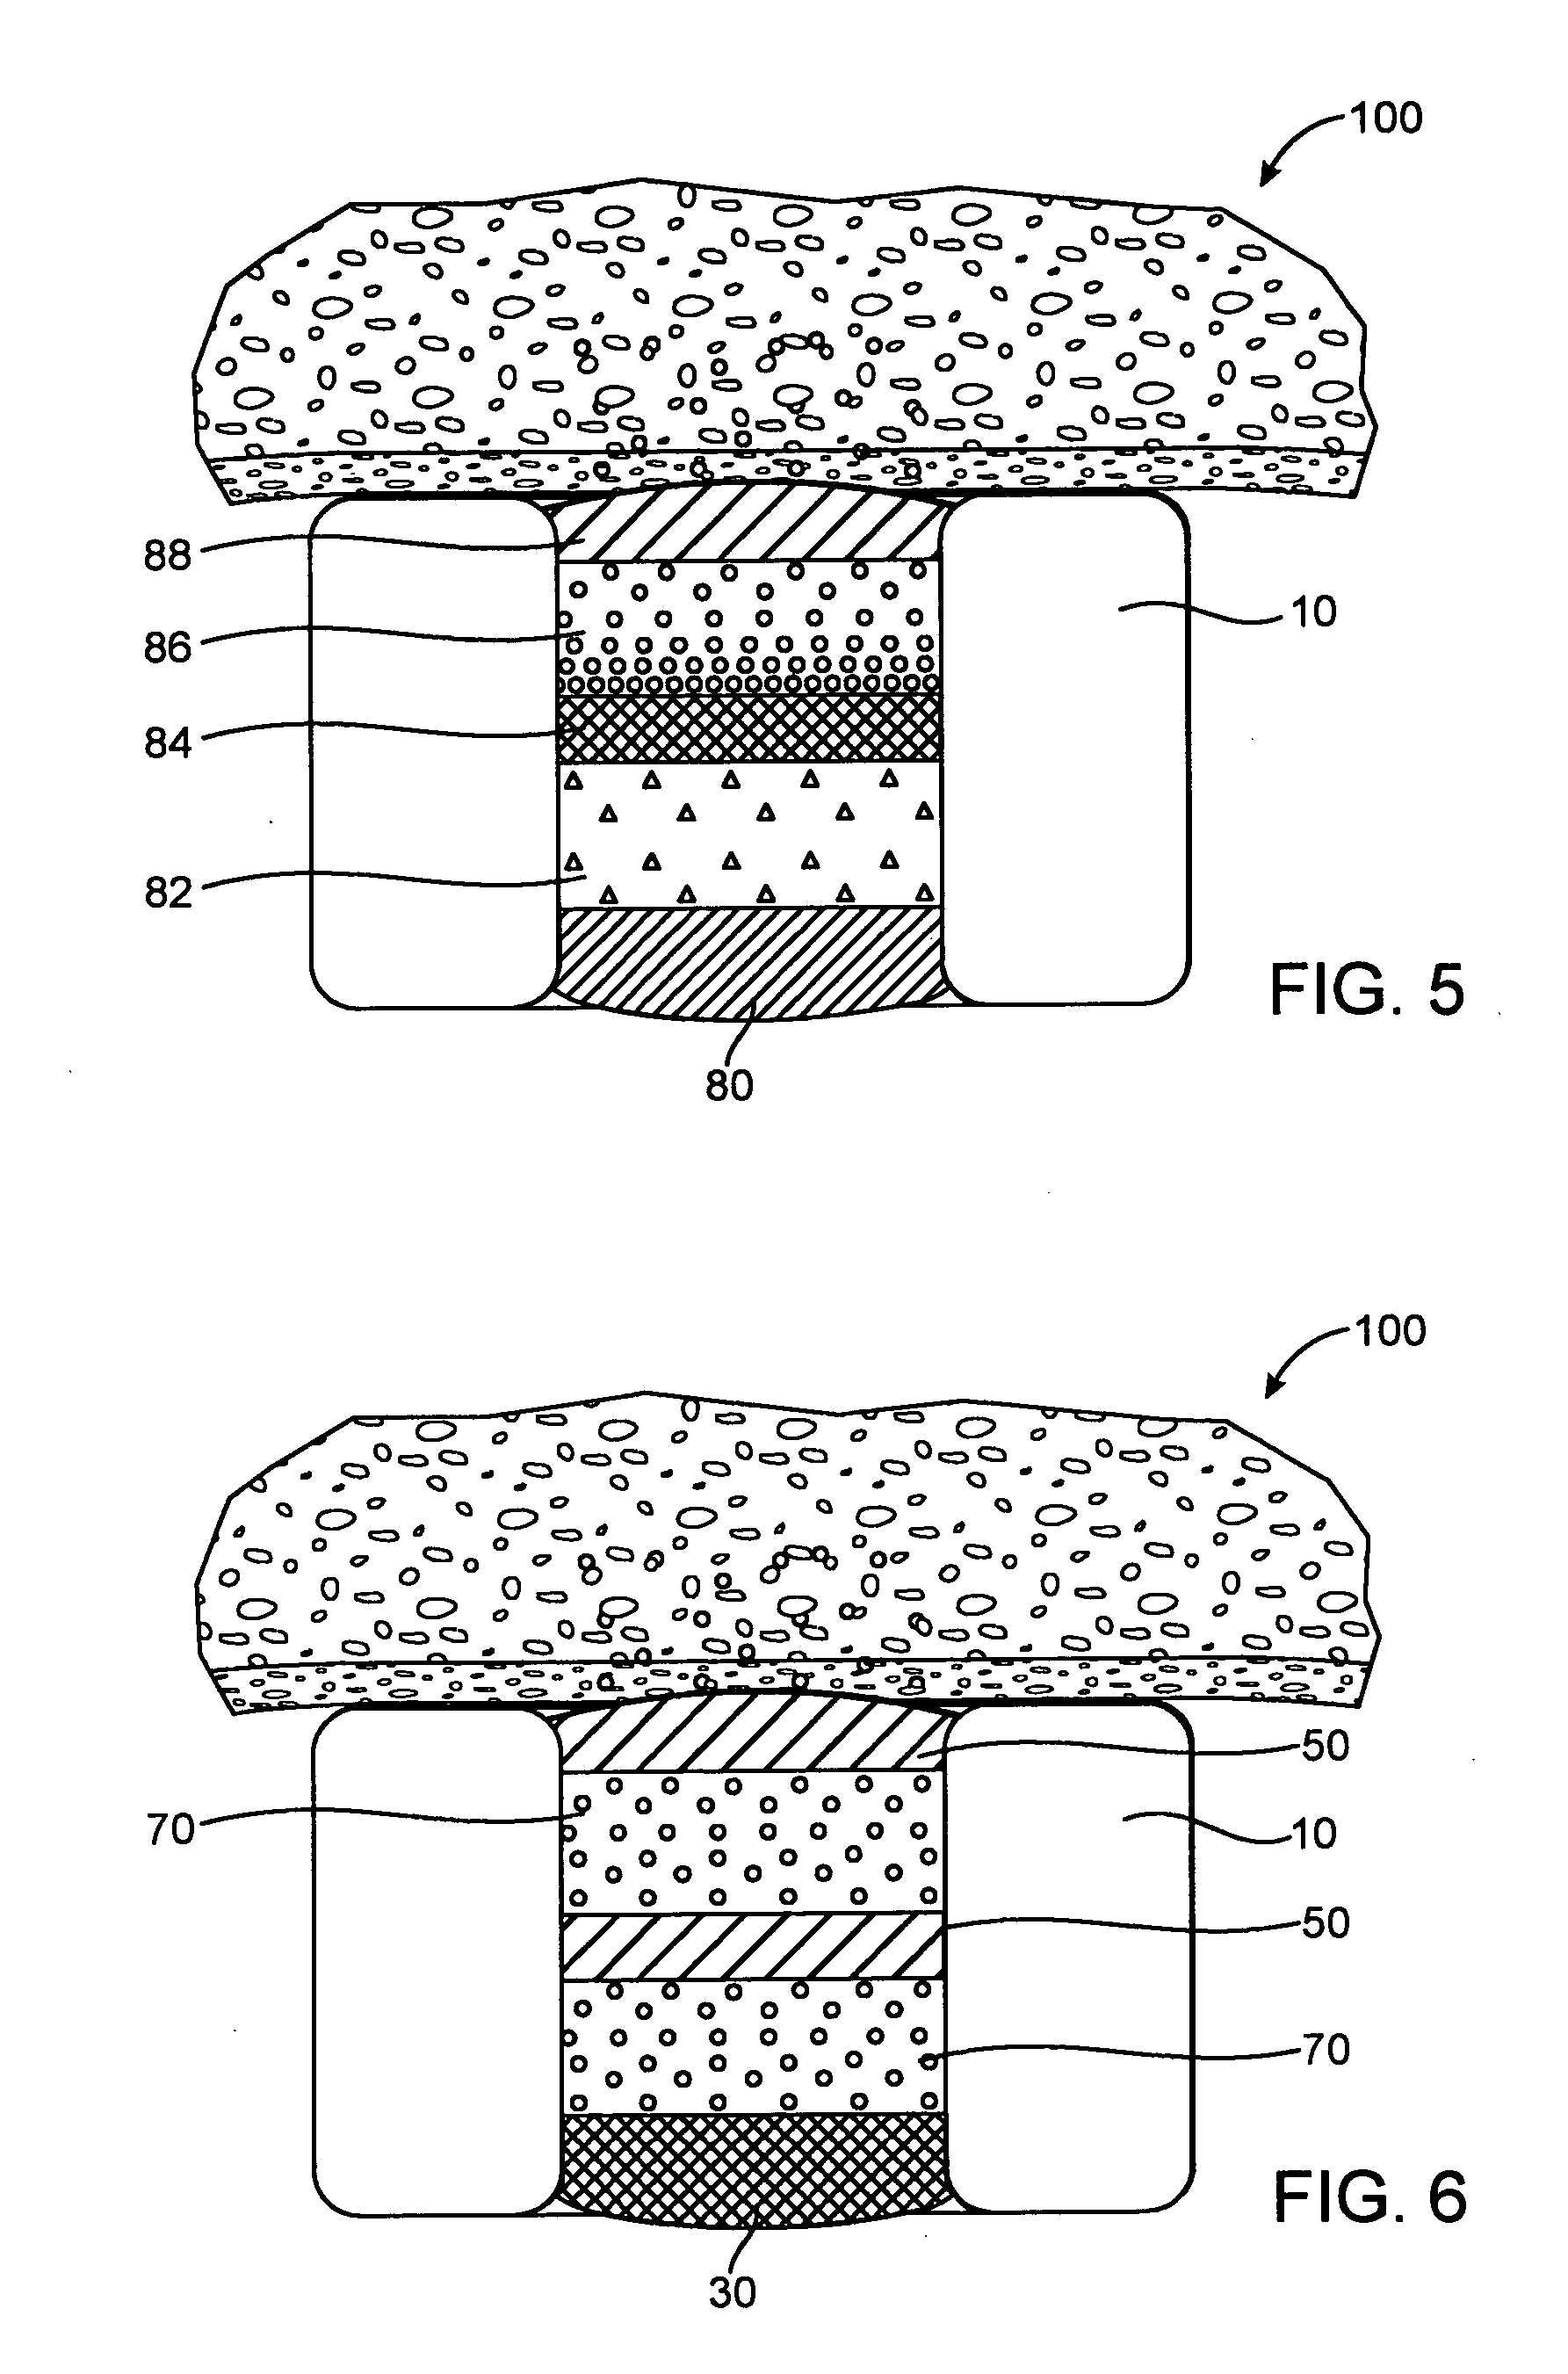 Expandable medical device with beneficial agent matrix formed by a multi solvent system